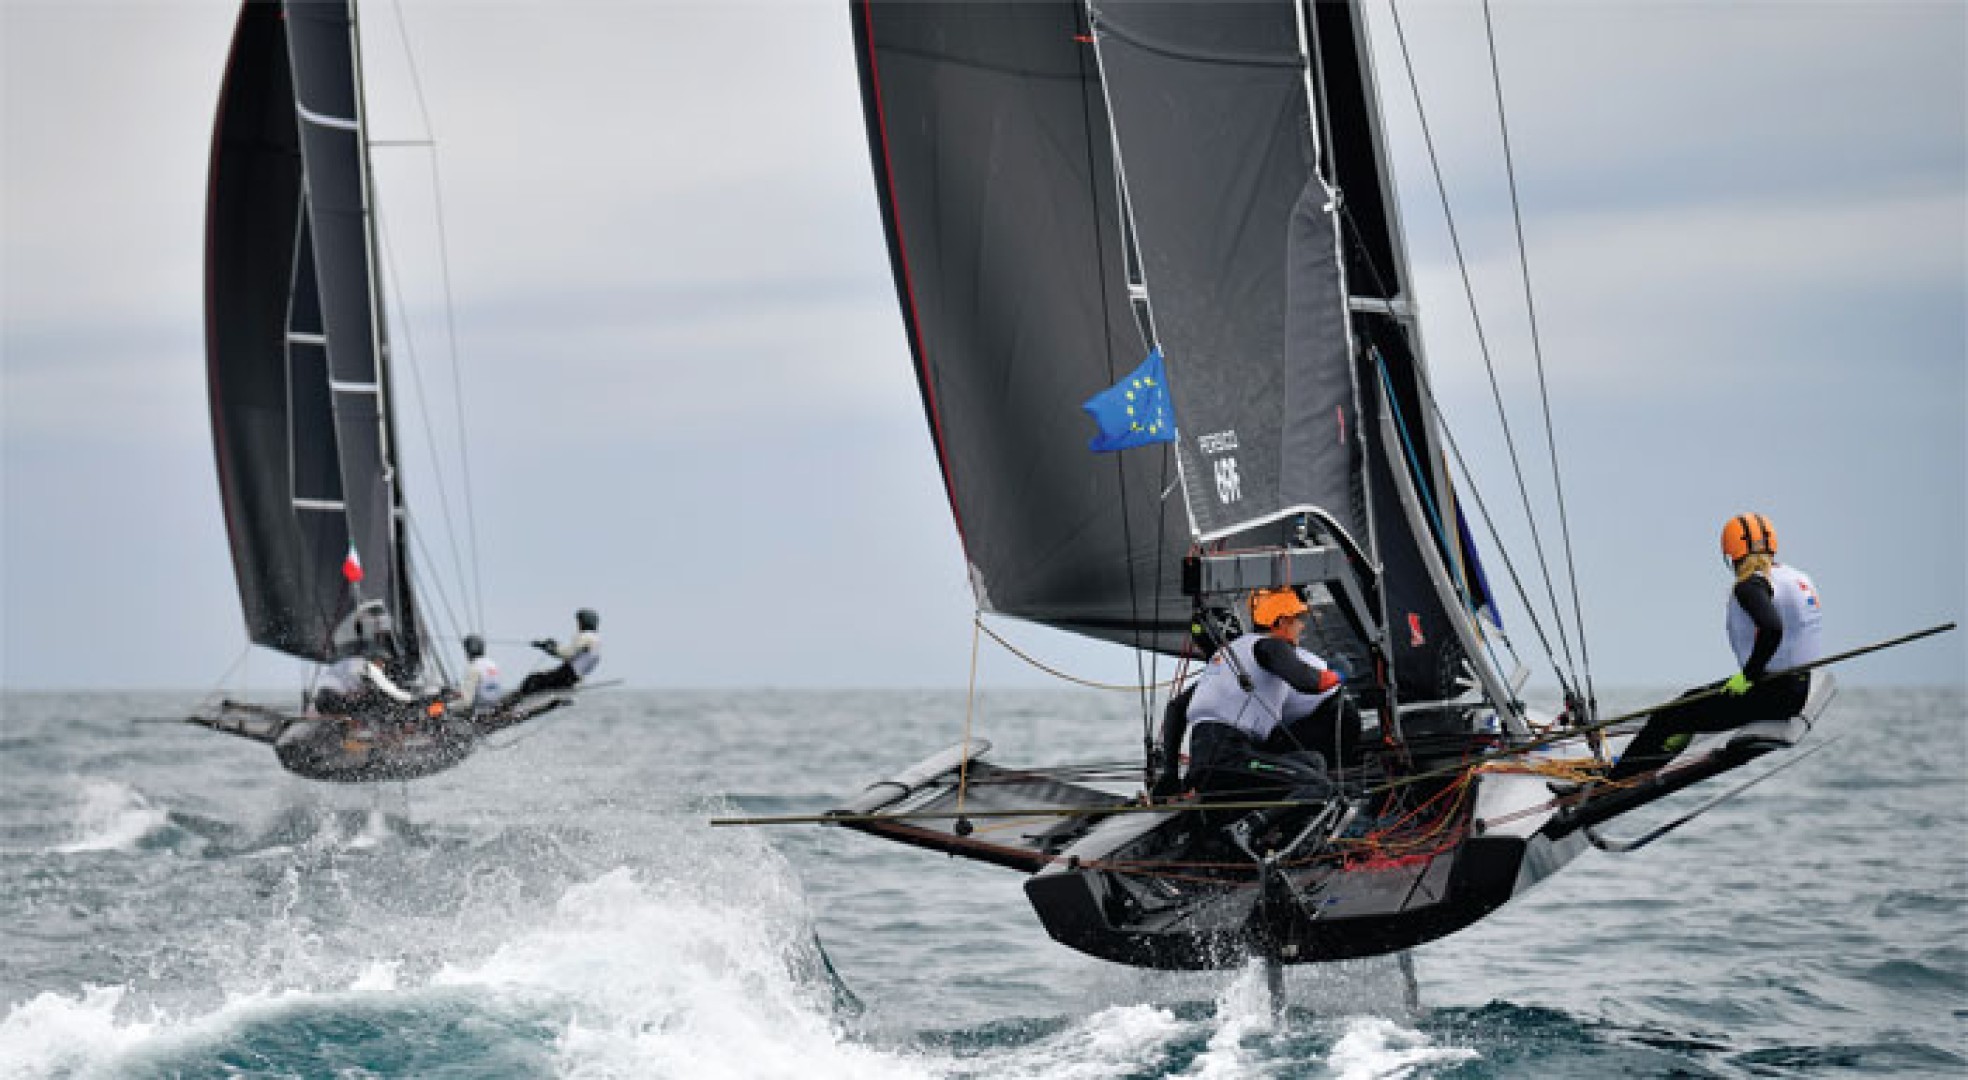 The Persico 69F is a three-man foiling dinghy that aims to bridge the enormous technology and performance gap between grassroots competitive sailing and professional grand prix racing